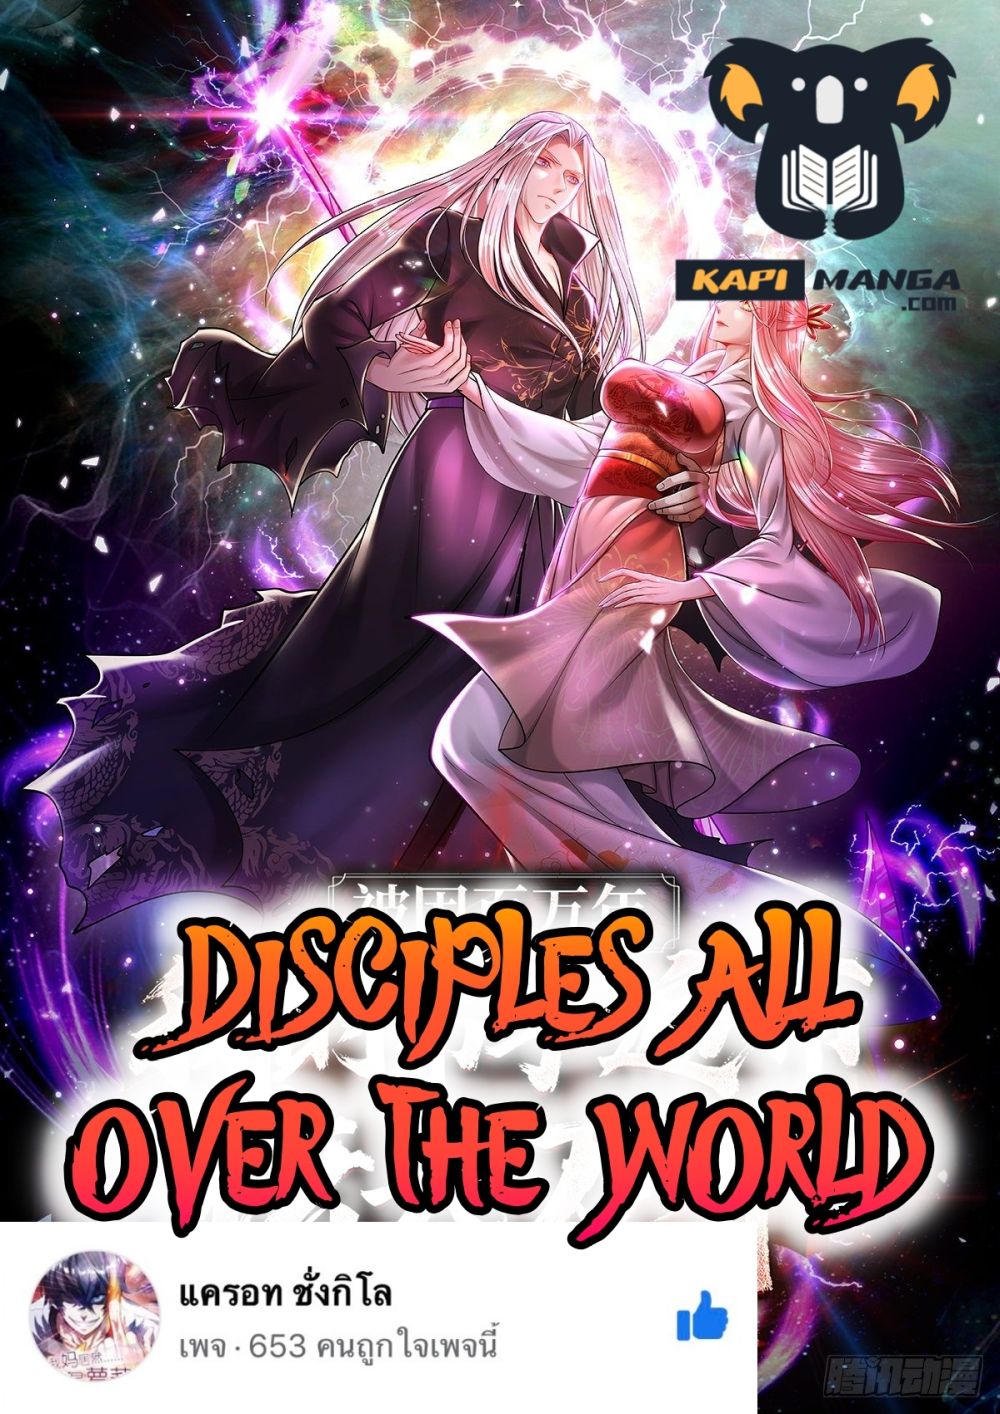 Disciples All Over the World à¸à¸­à¸à¸à¸µà¹ 53 (1)